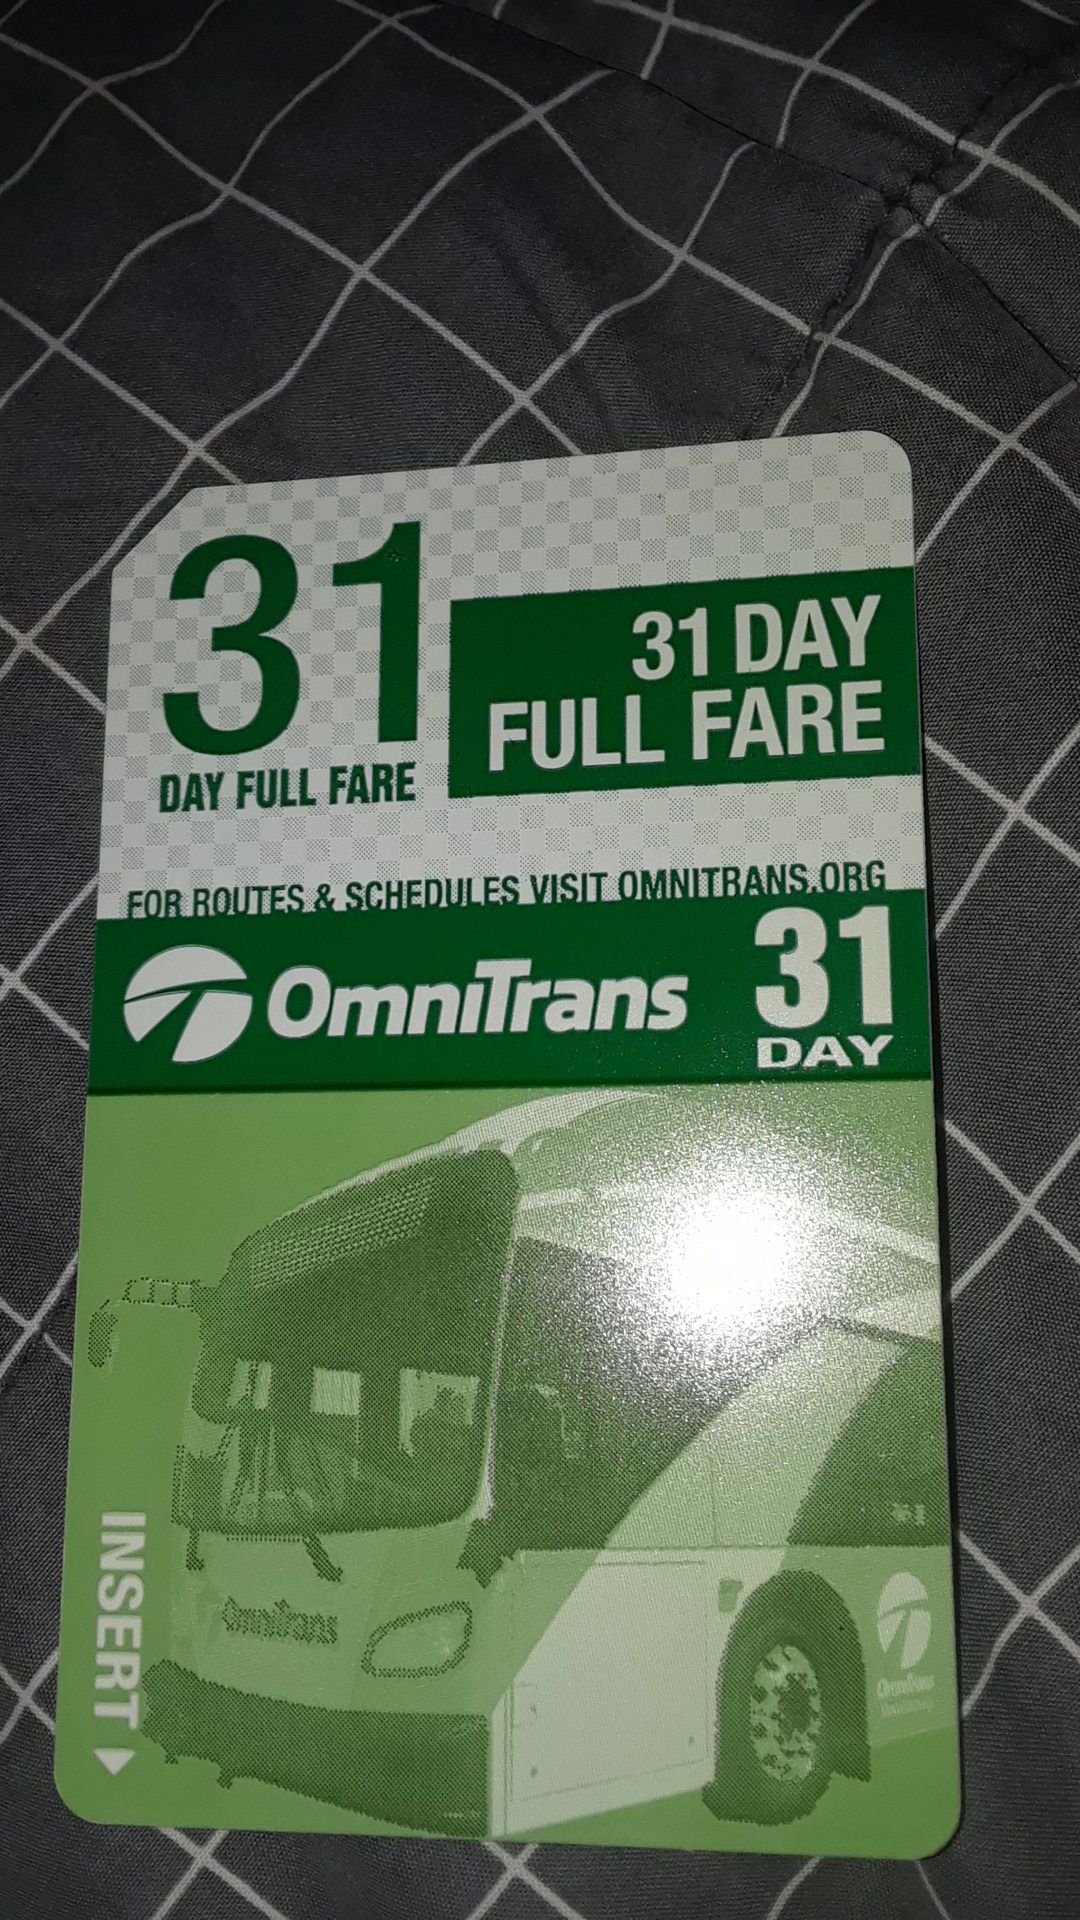 31 Day full fare bus pass